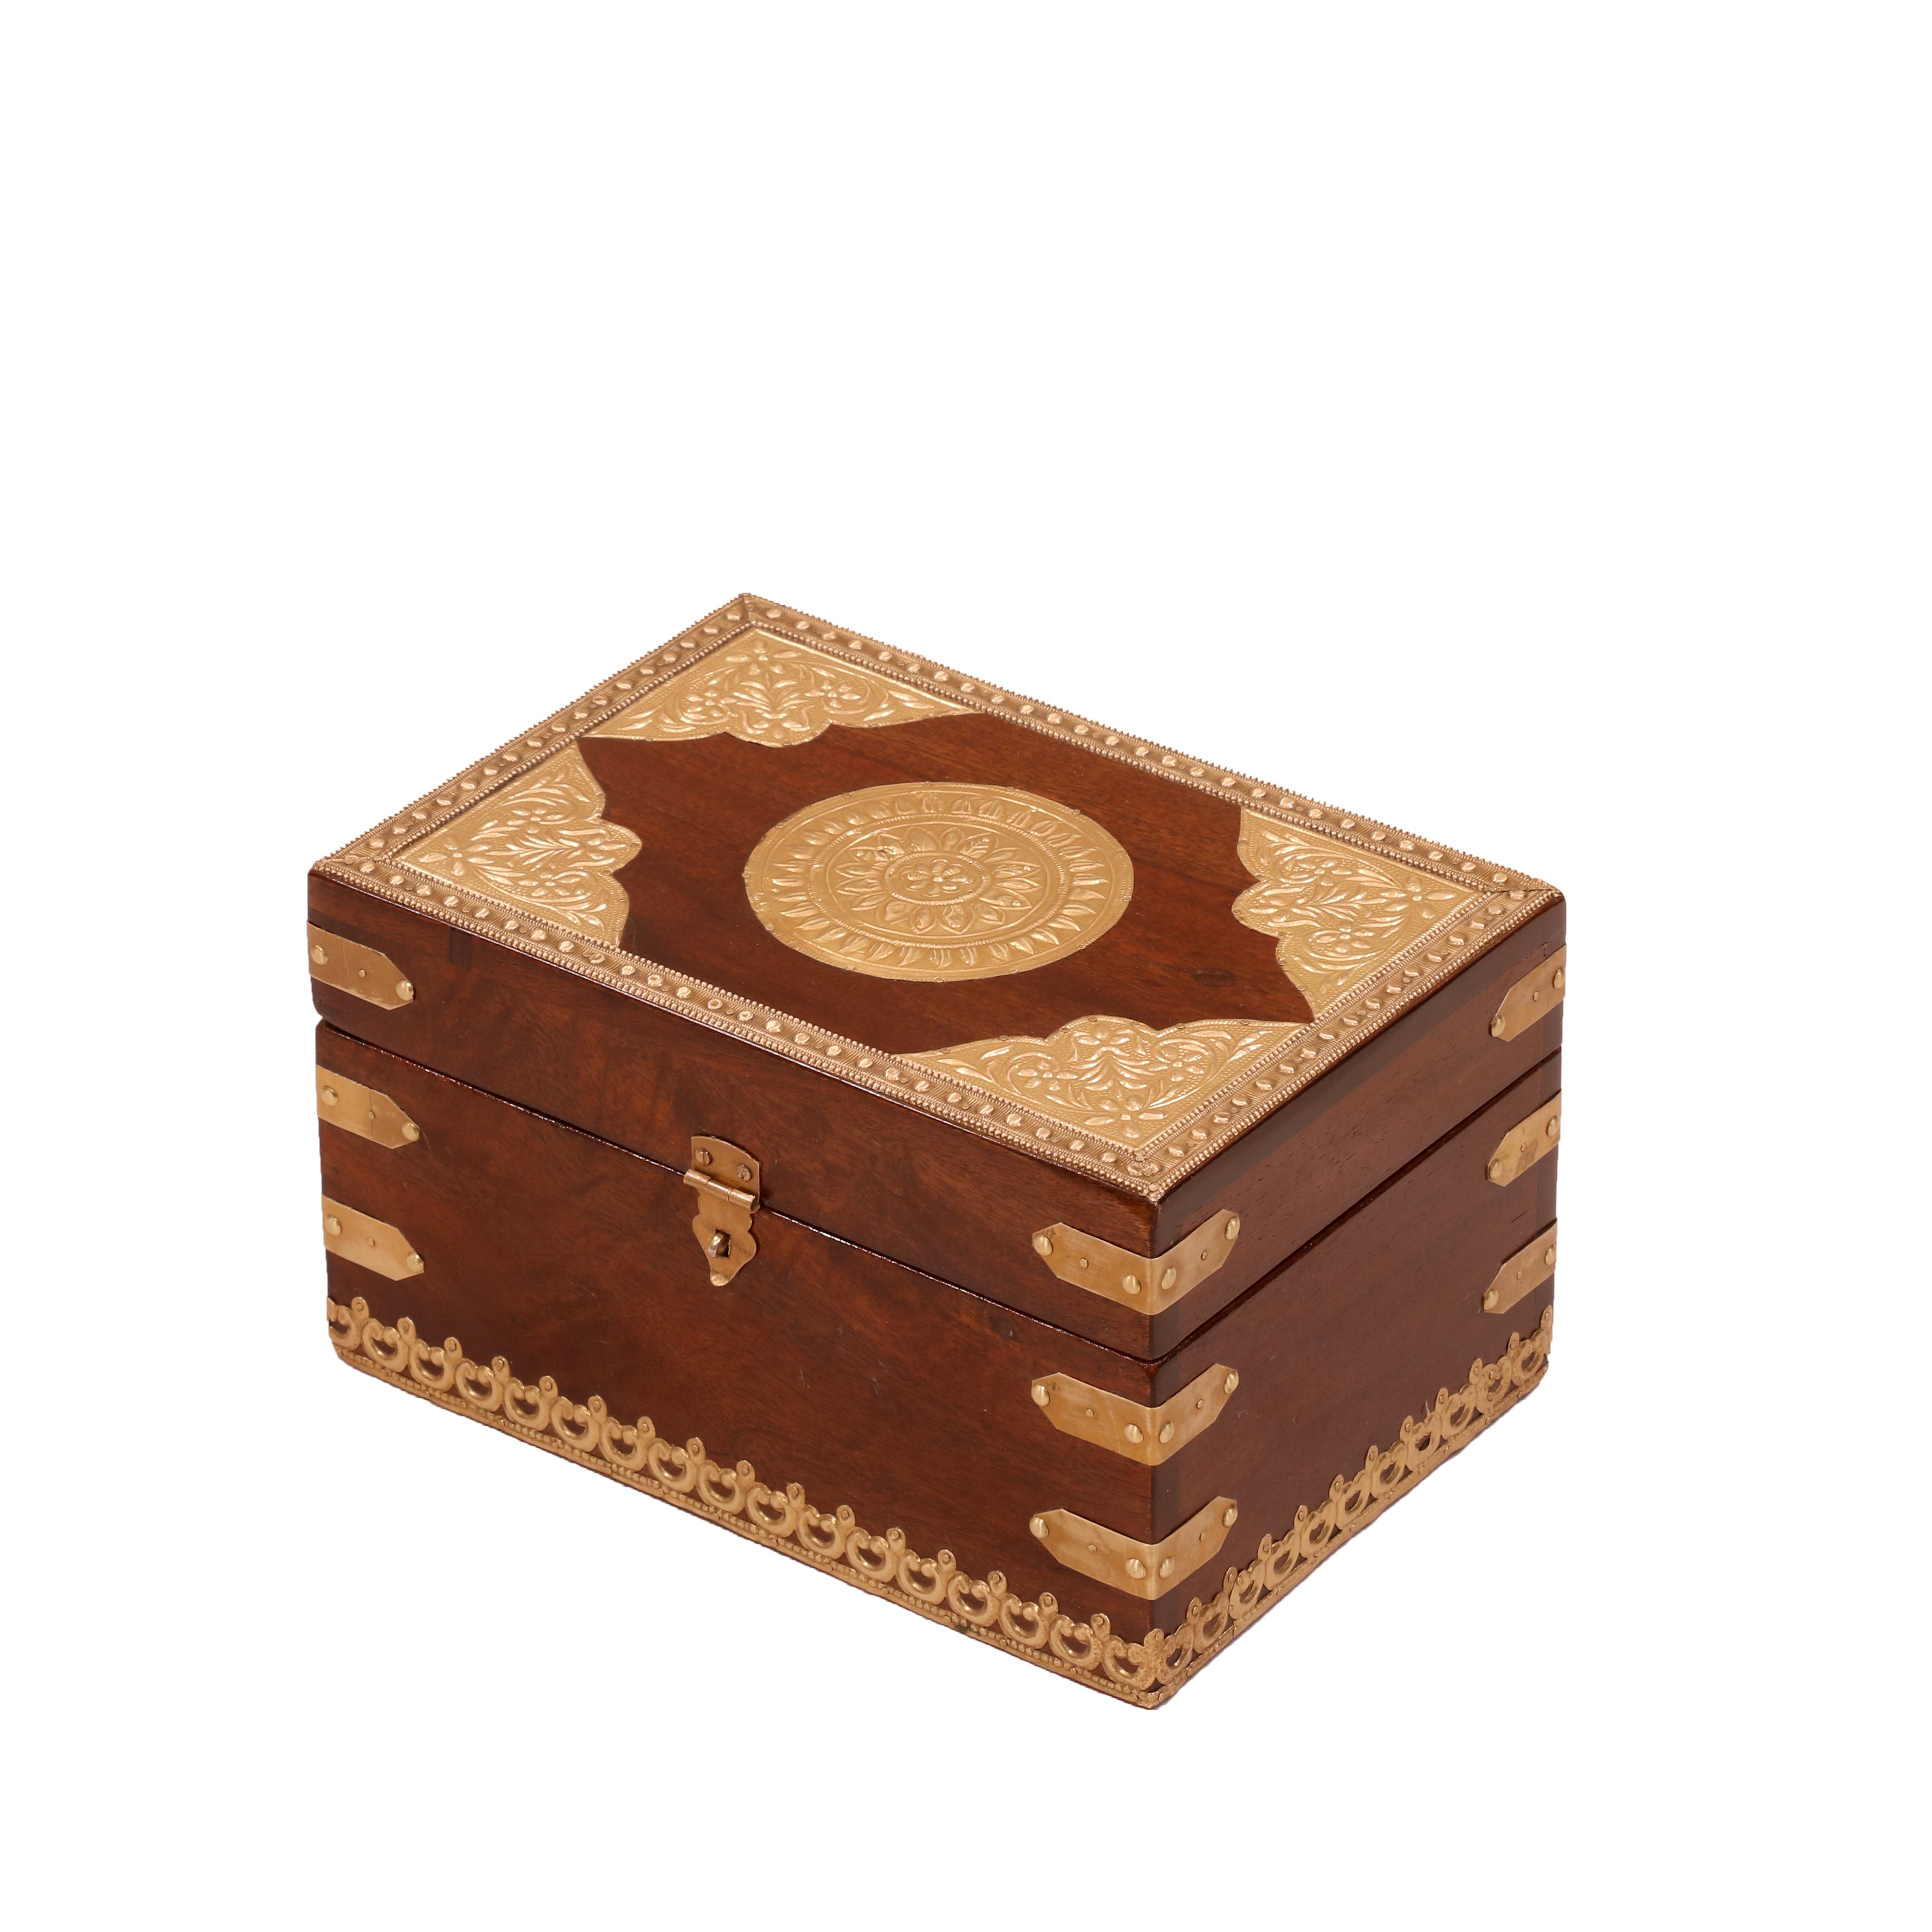 Golden Toned Handmade Brass Fitted Wooden Jewelry Box for Home Wooden Box